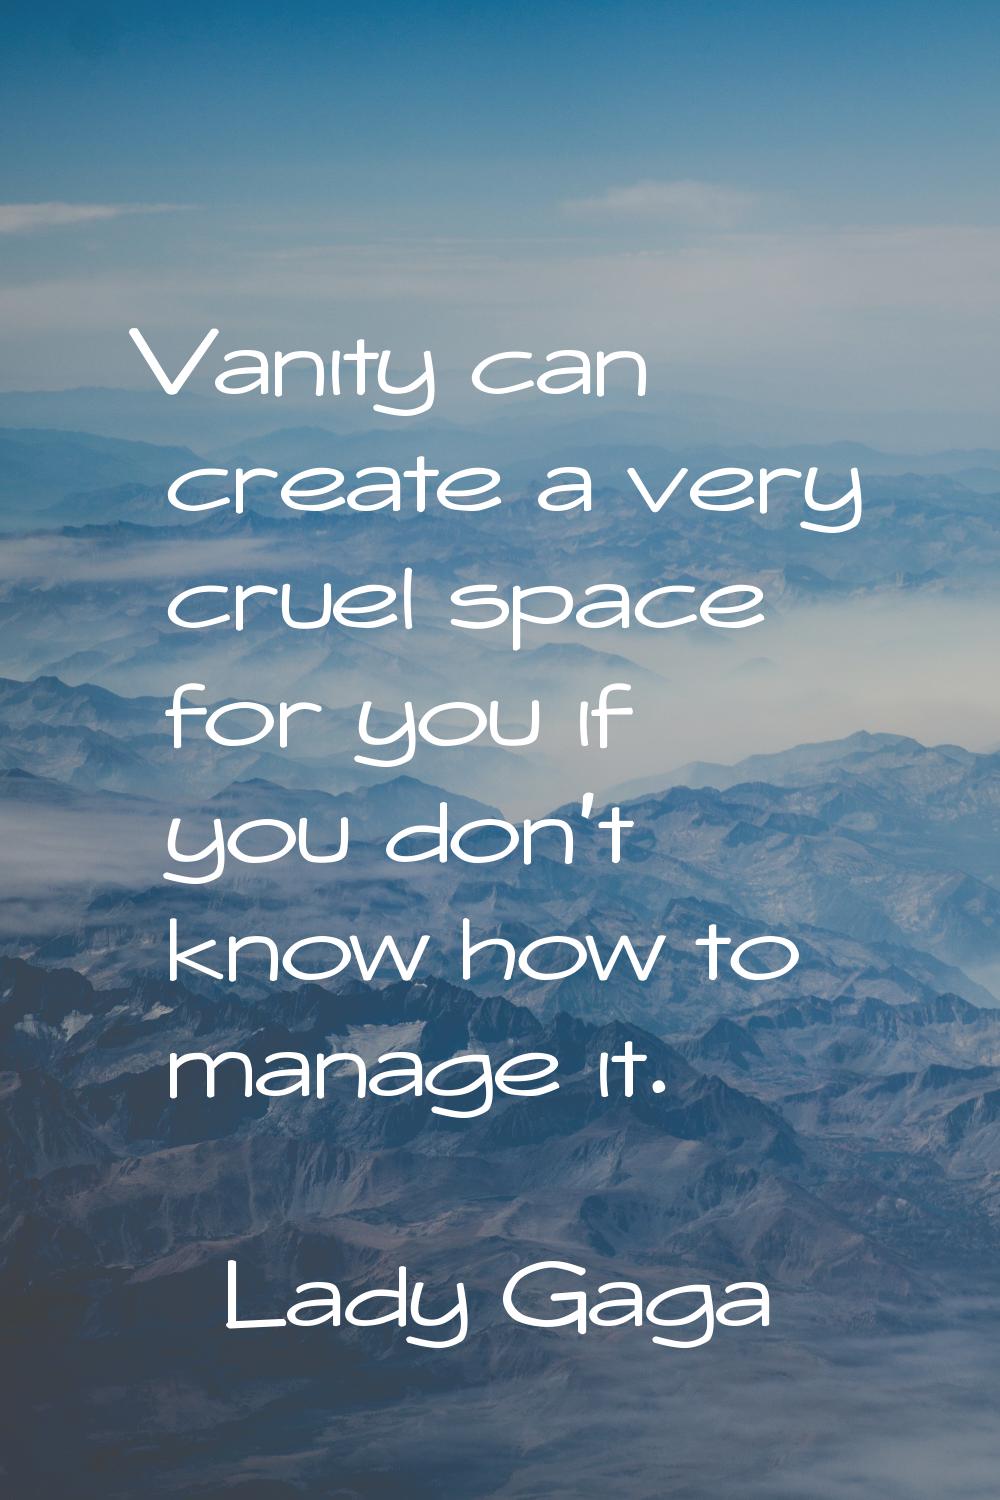 Vanity can create a very cruel space for you if you don't know how to manage it.